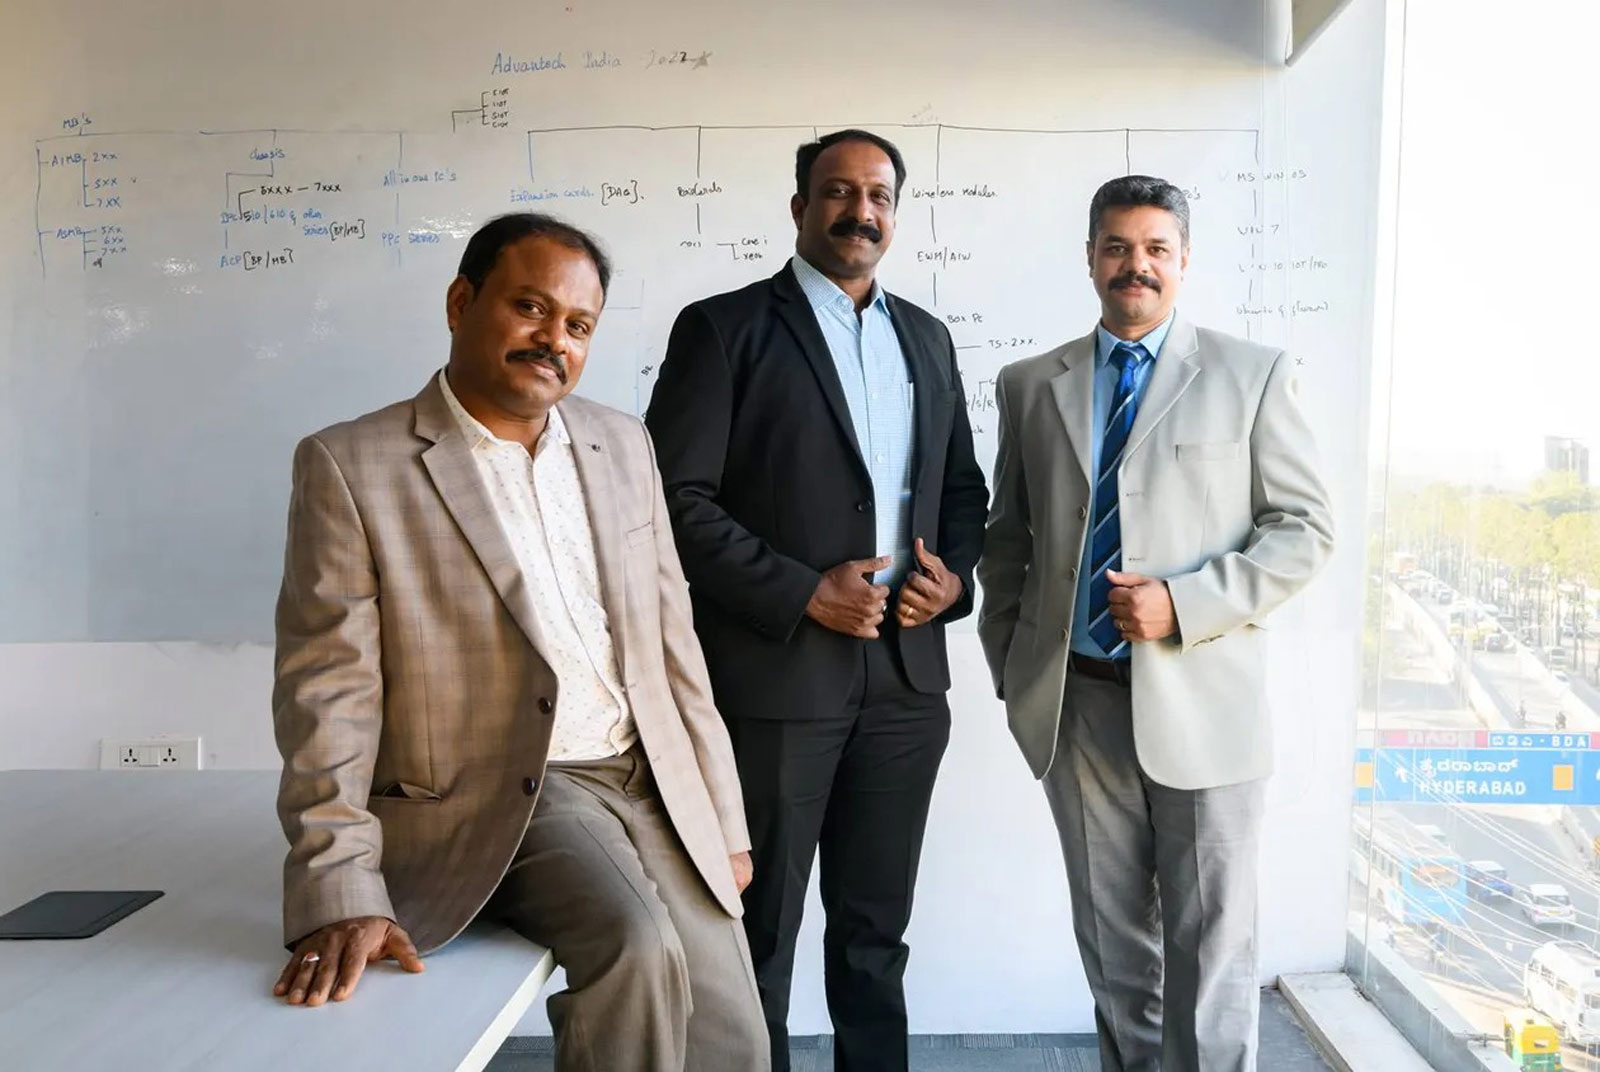 Advantech bags 70% of India's metro orders with the help of local talent